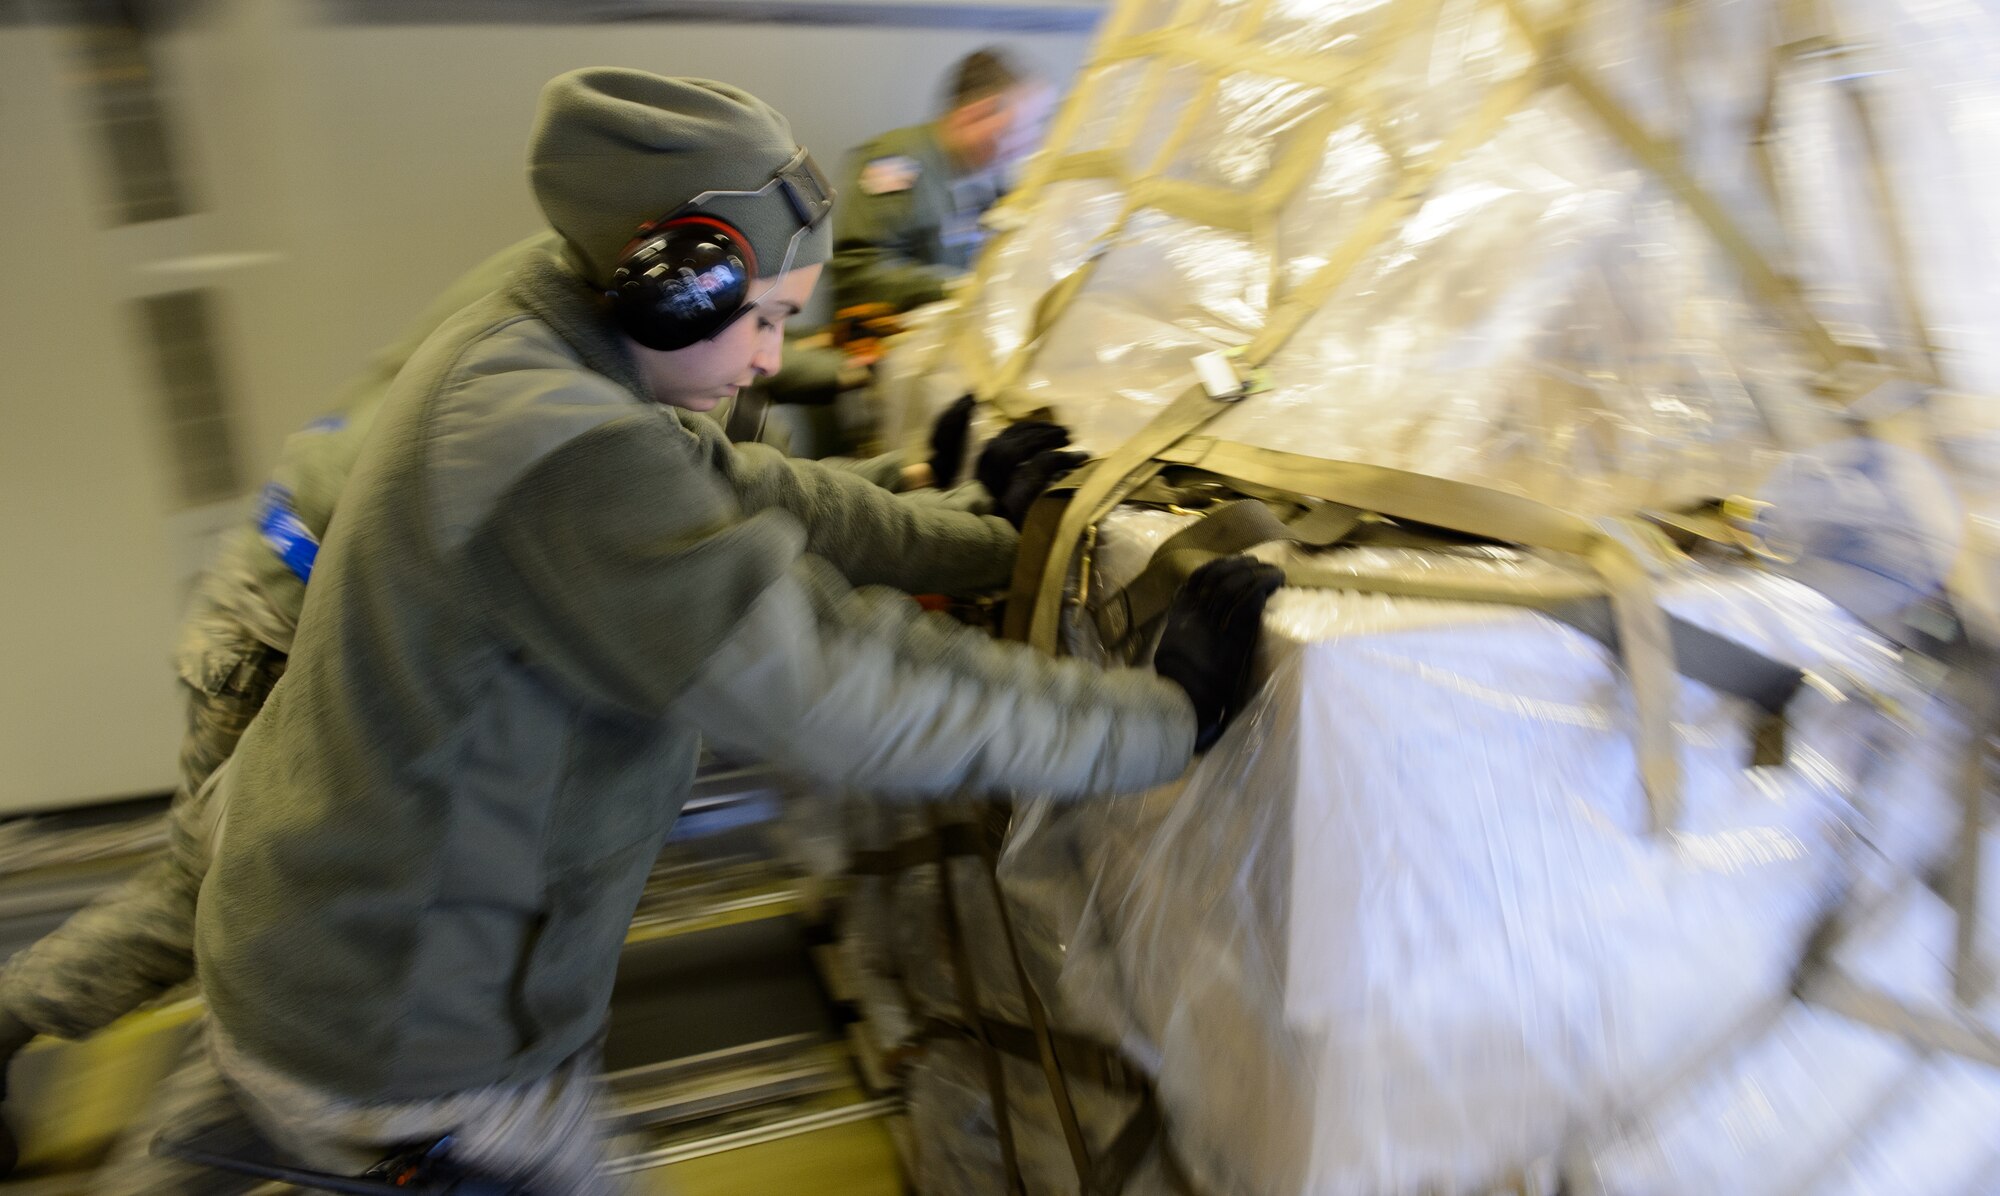 Senior Airman Caitlin Emery, 721st Aerial Port Squadron ramp services specialist, and Airmen from the 721st unload cargo March 25, 2016, Ramstein Air Base, Germany. The cargo is part of the Denton program designed to move humanitarian cargo on a space-available status. (U.S. Air Force photo/Staff Sgt. Armando A. Schwier-Morales) 